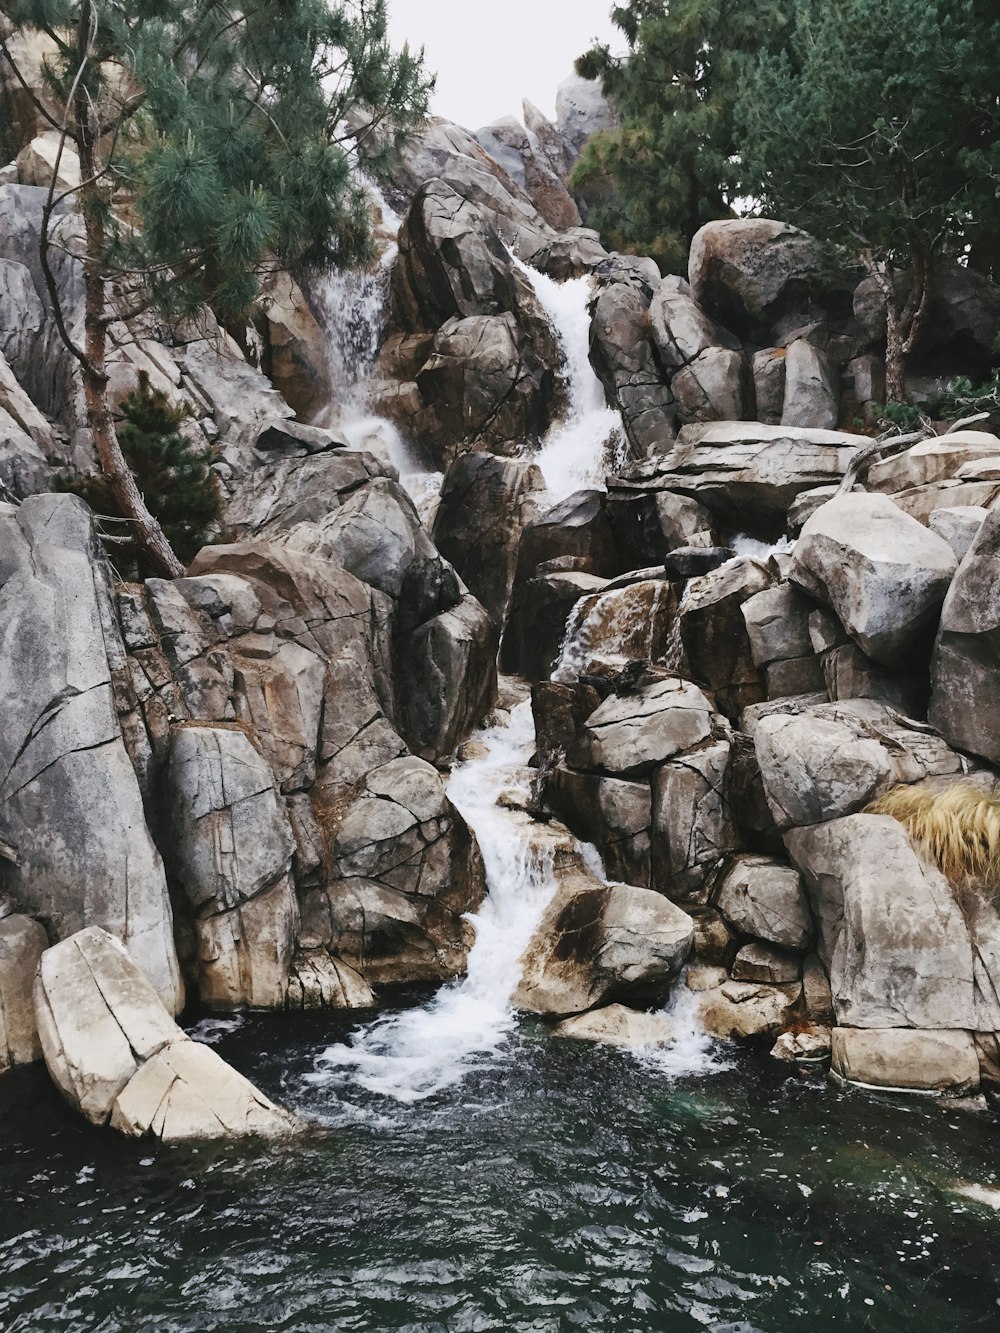 brown rocky river with water falls